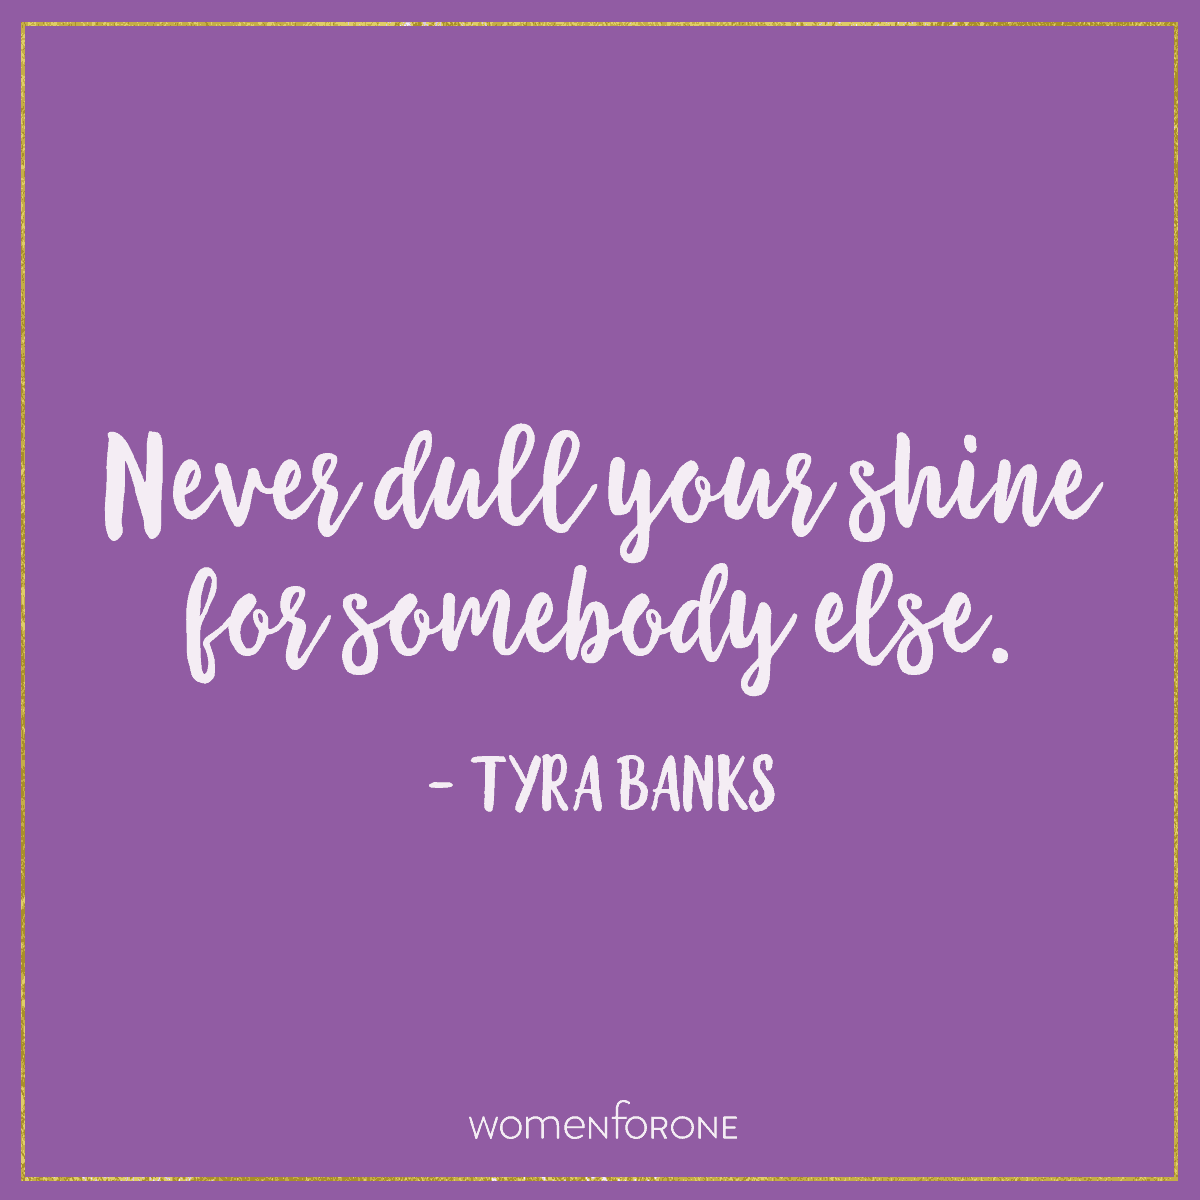 Never dull your shine for somebody else